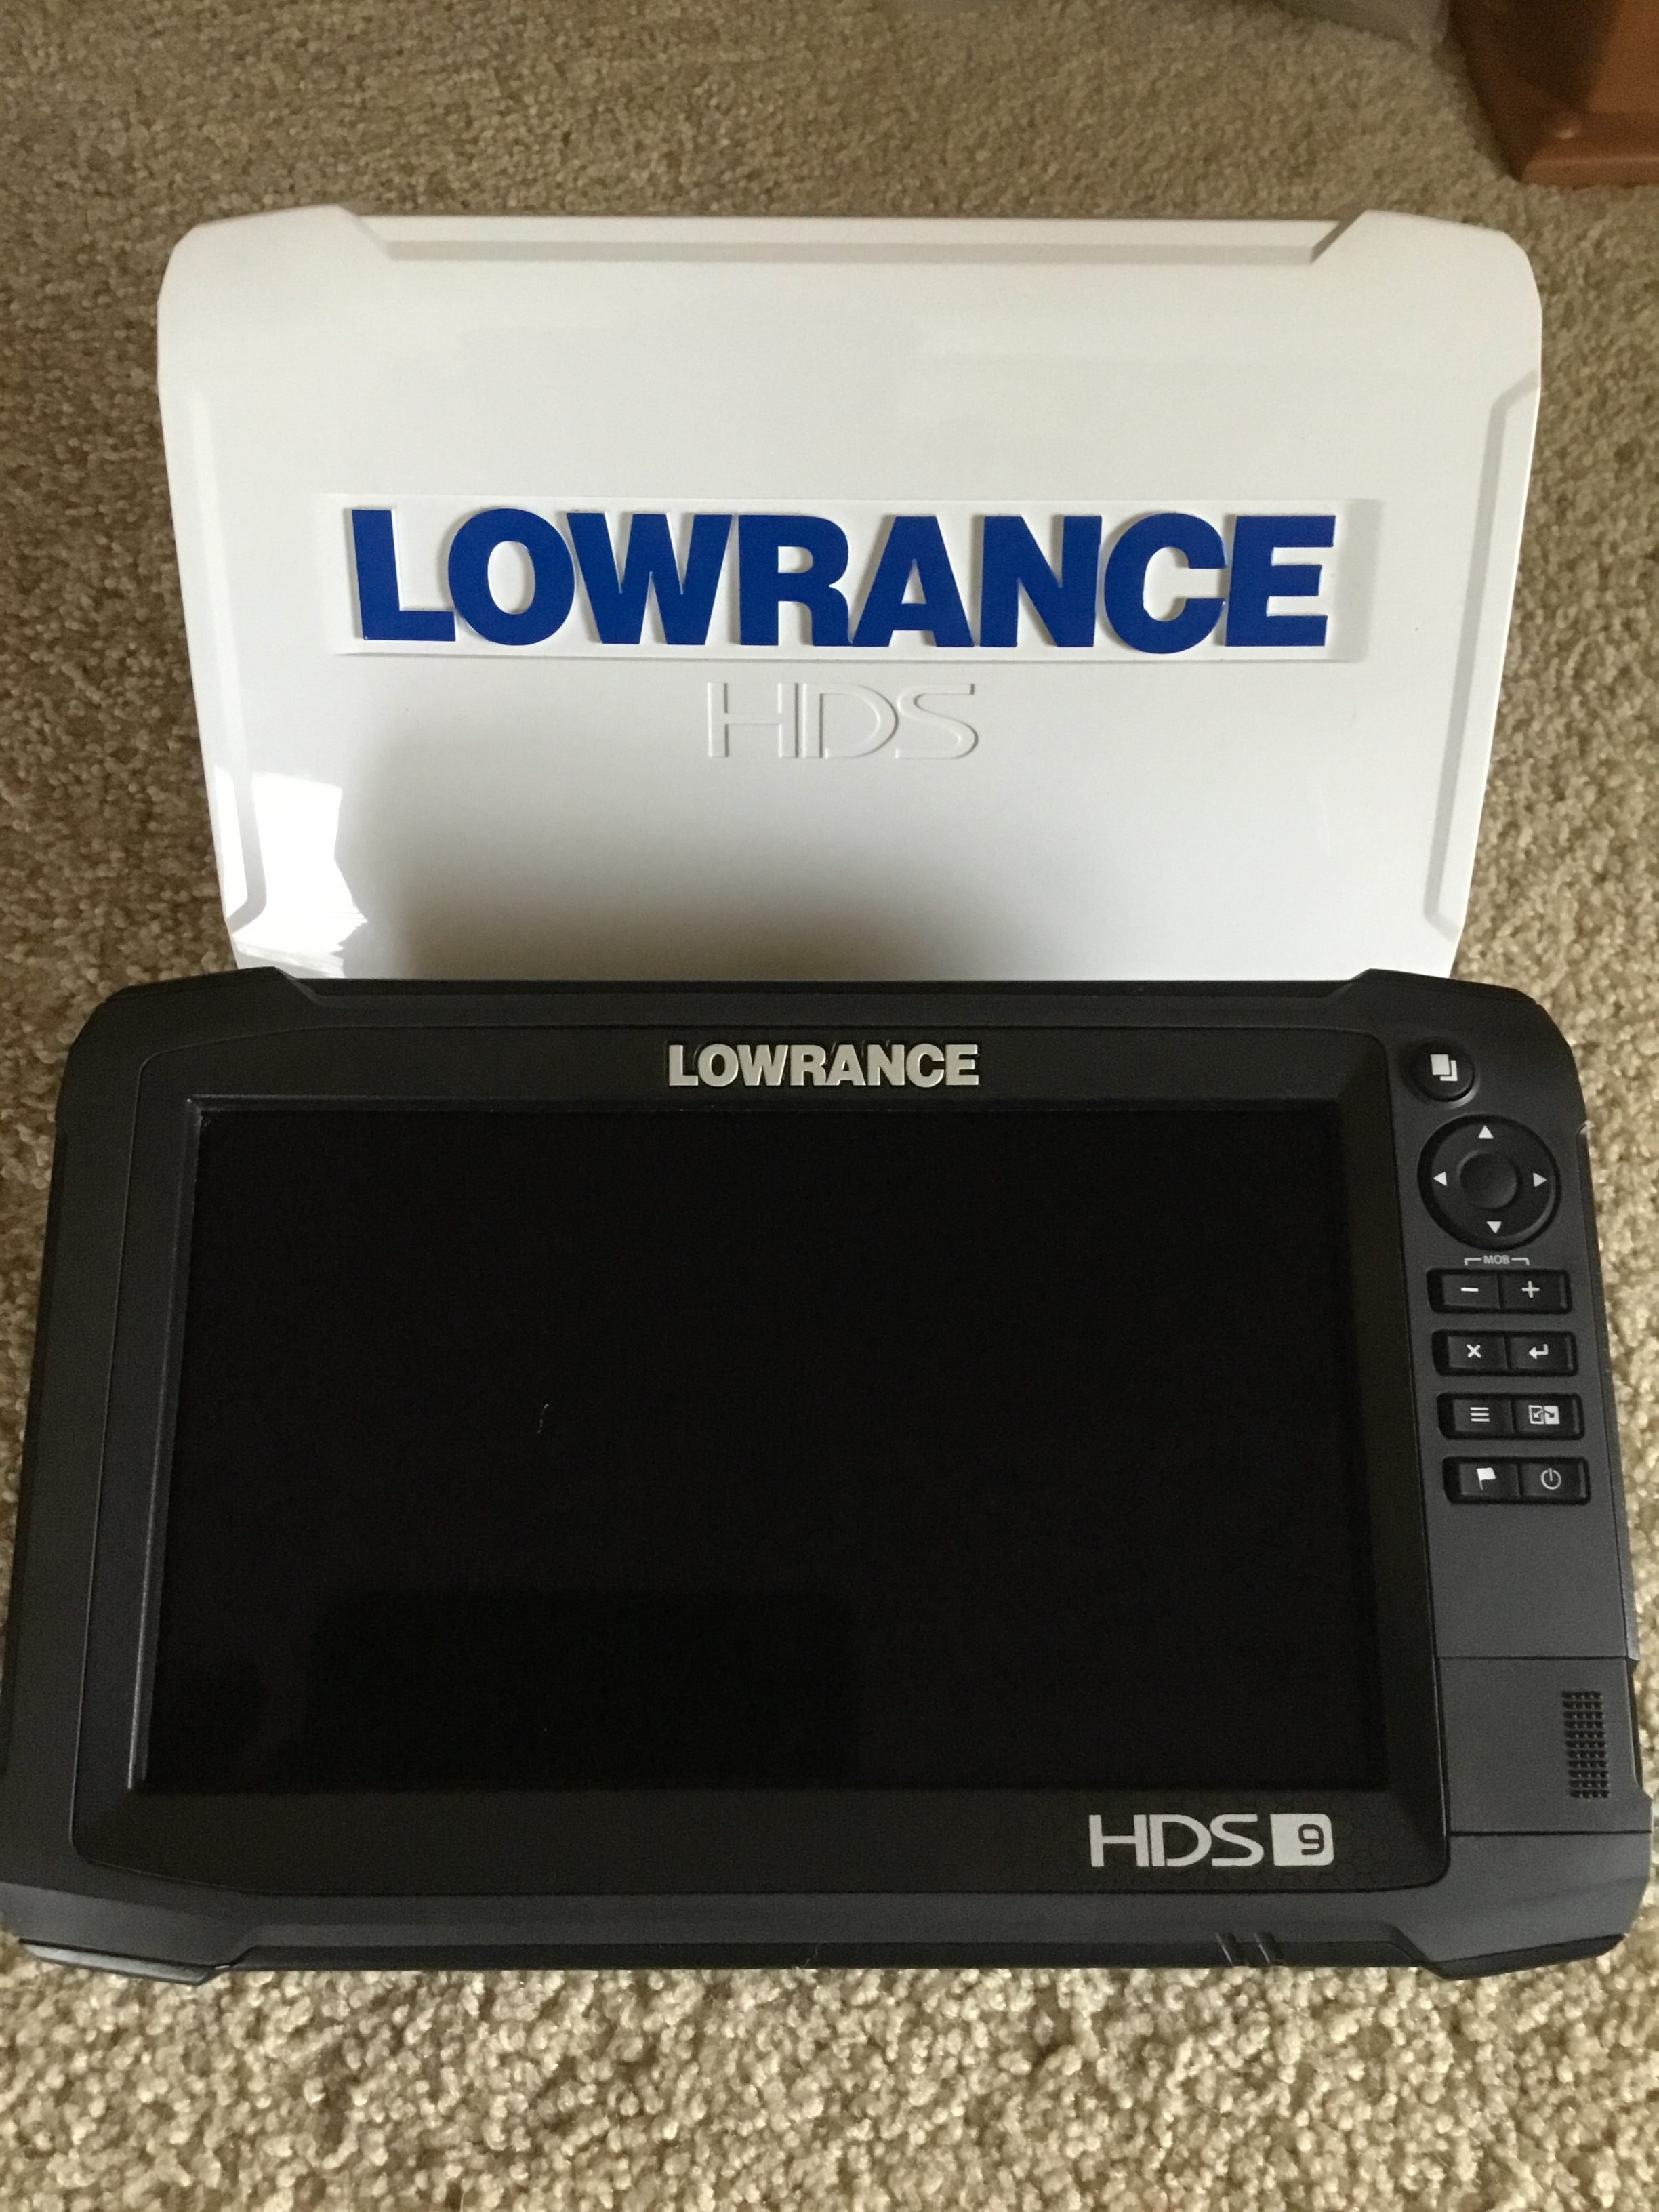 Lowrance HDS Carbon 9 - Classified Ads - Classified Ads | In-Depth Outdoors